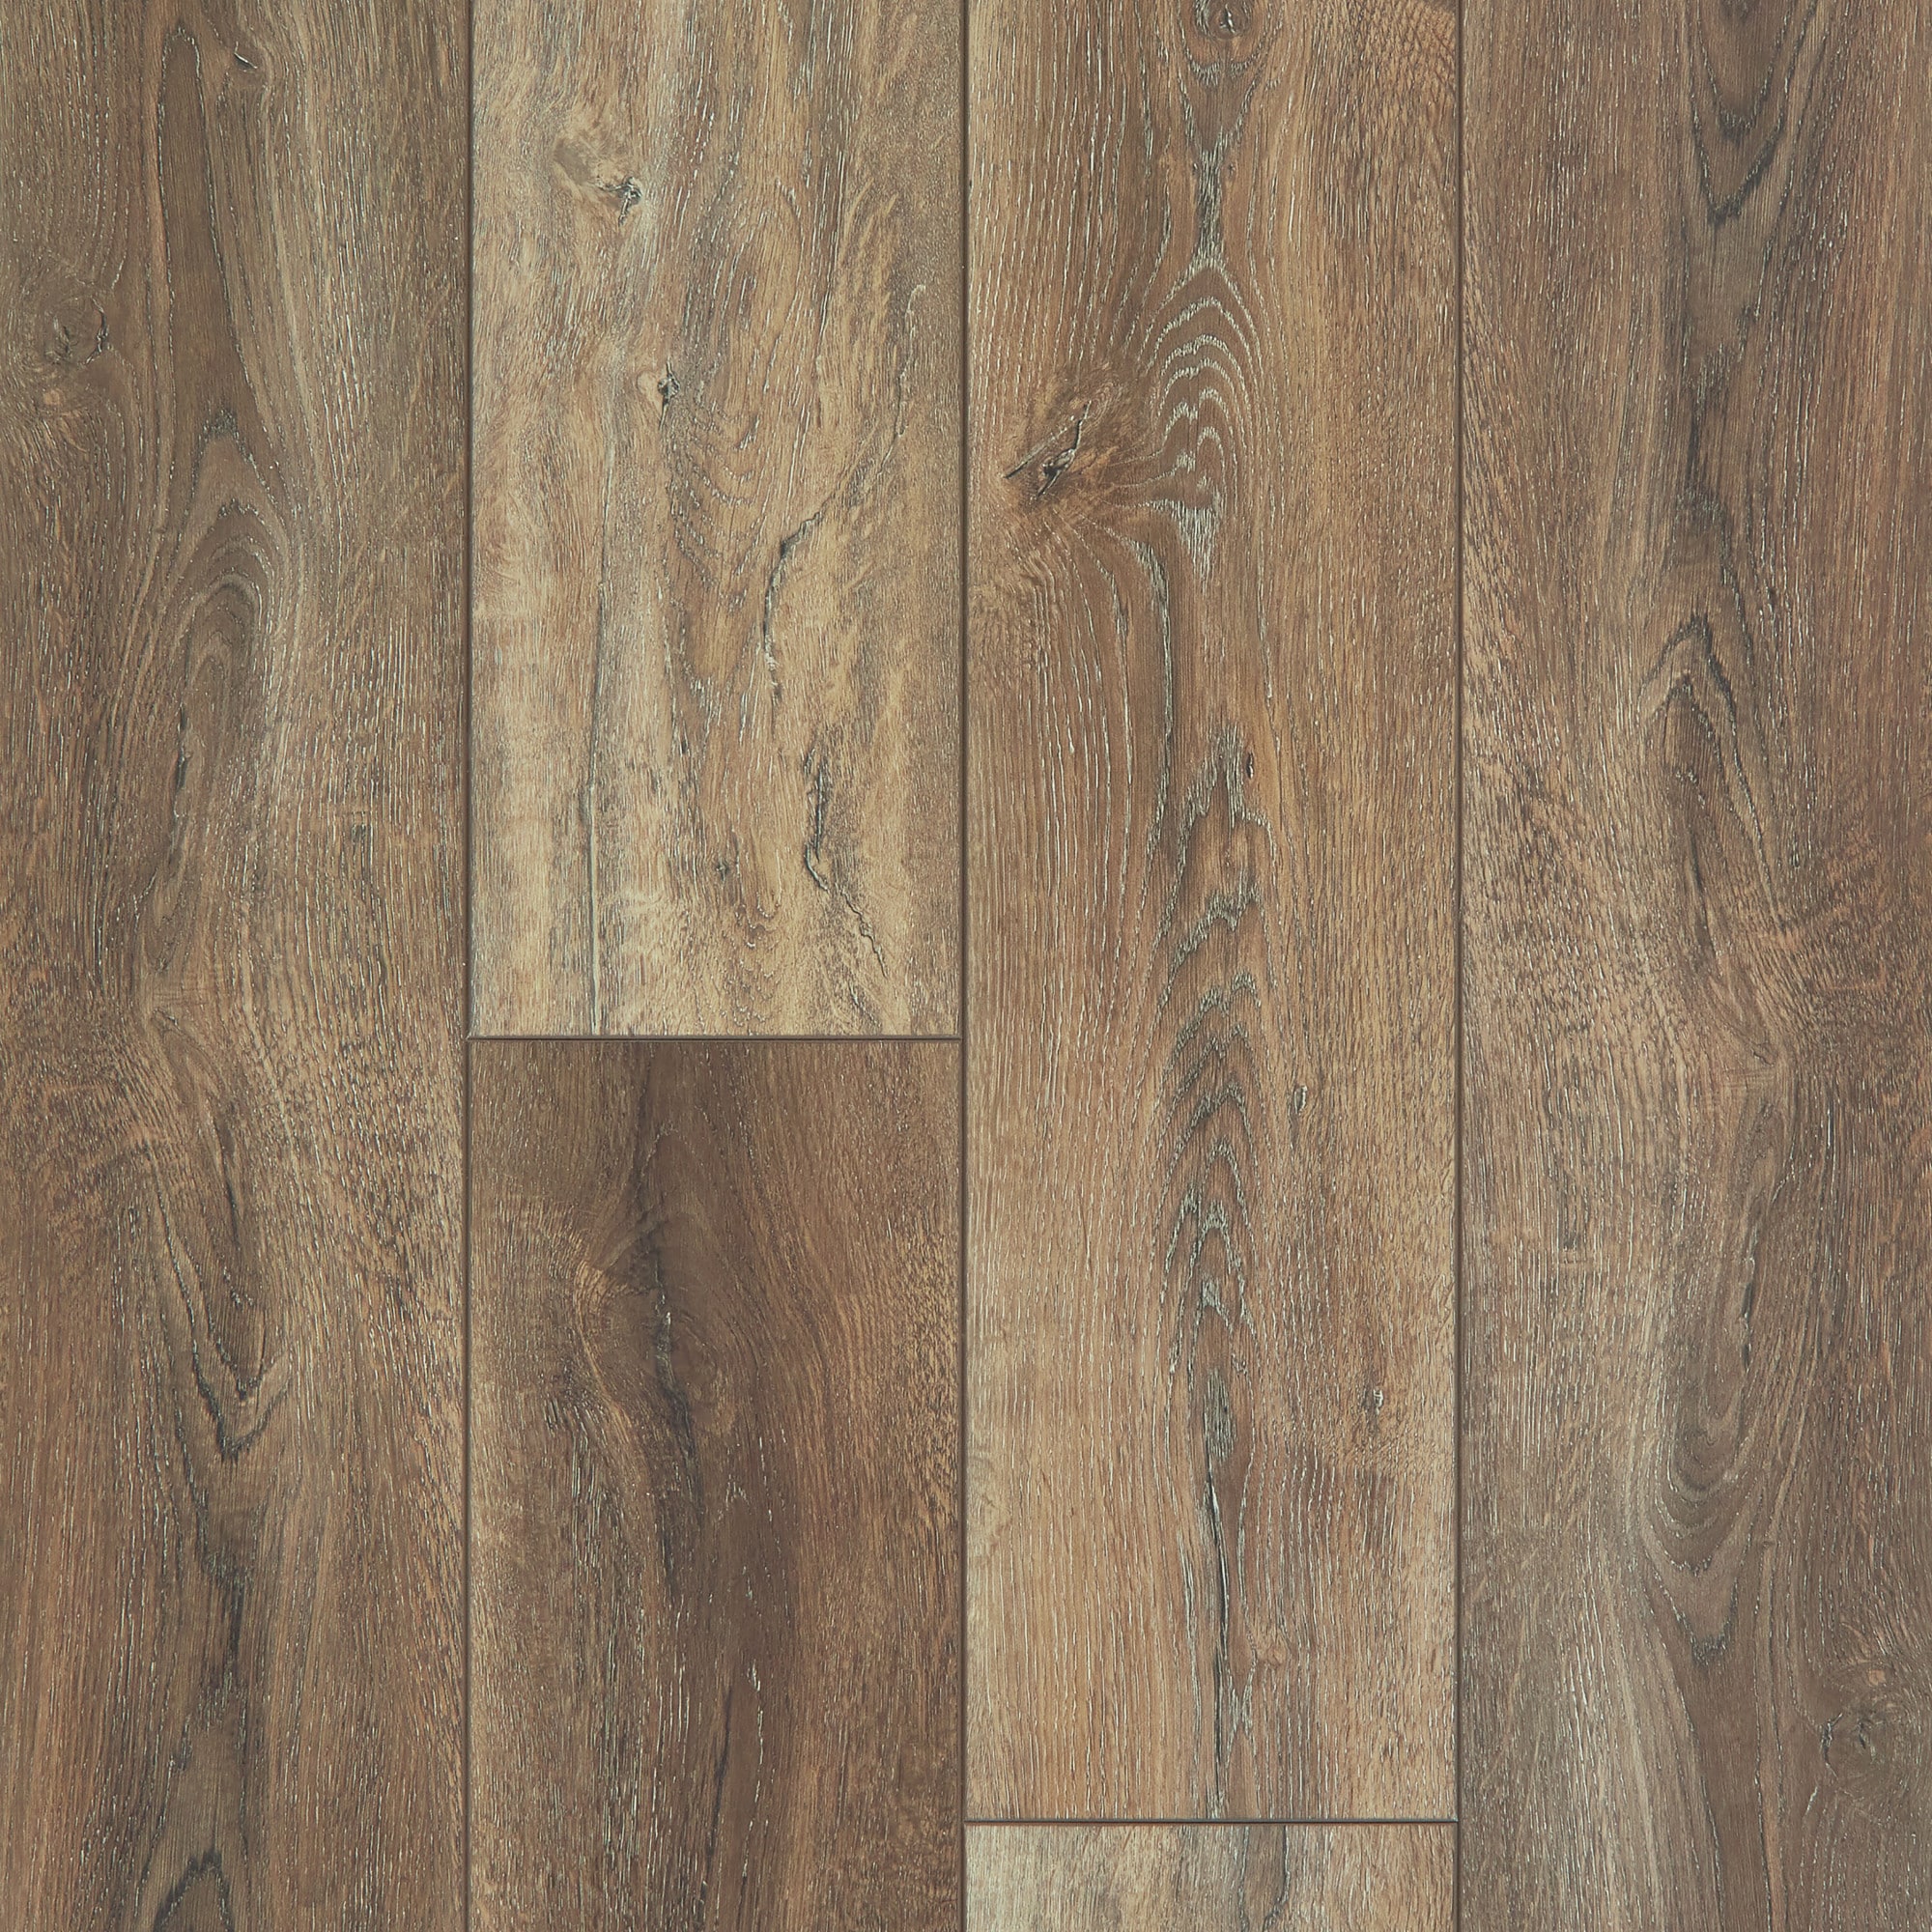 Shaw Parallax Hd Plus Poised 7 In Wide, Shaw Luxury Vinyl Plank Flooring Cost